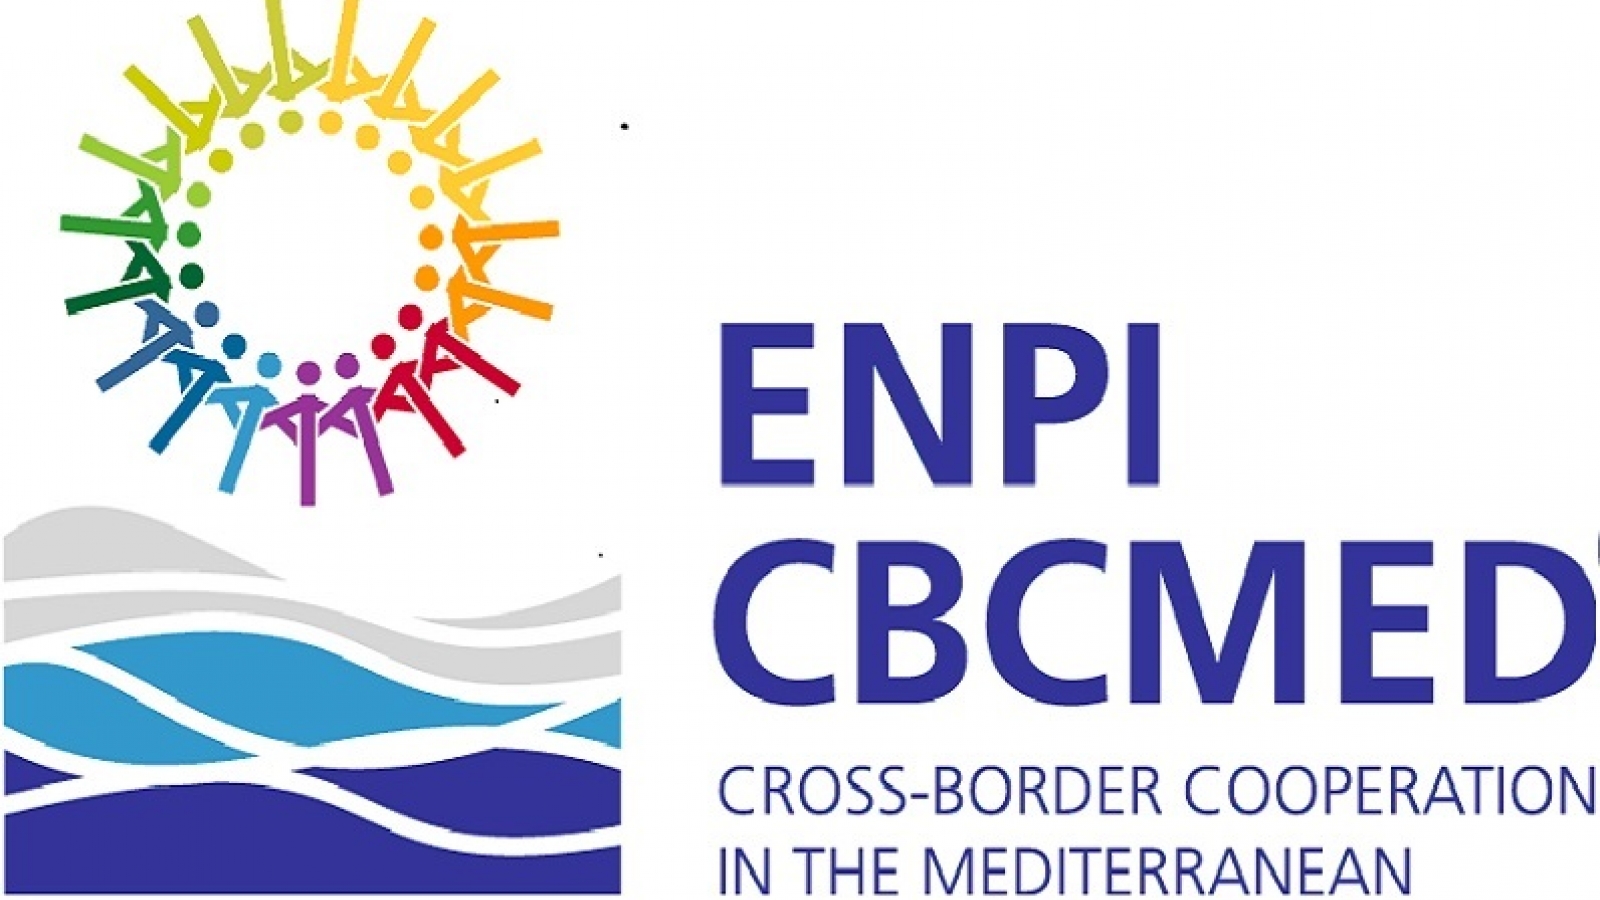 ENI CBC MED 2019 - strategic projects: Proposal from European Institute for Local Development (EILD) - INTROMED